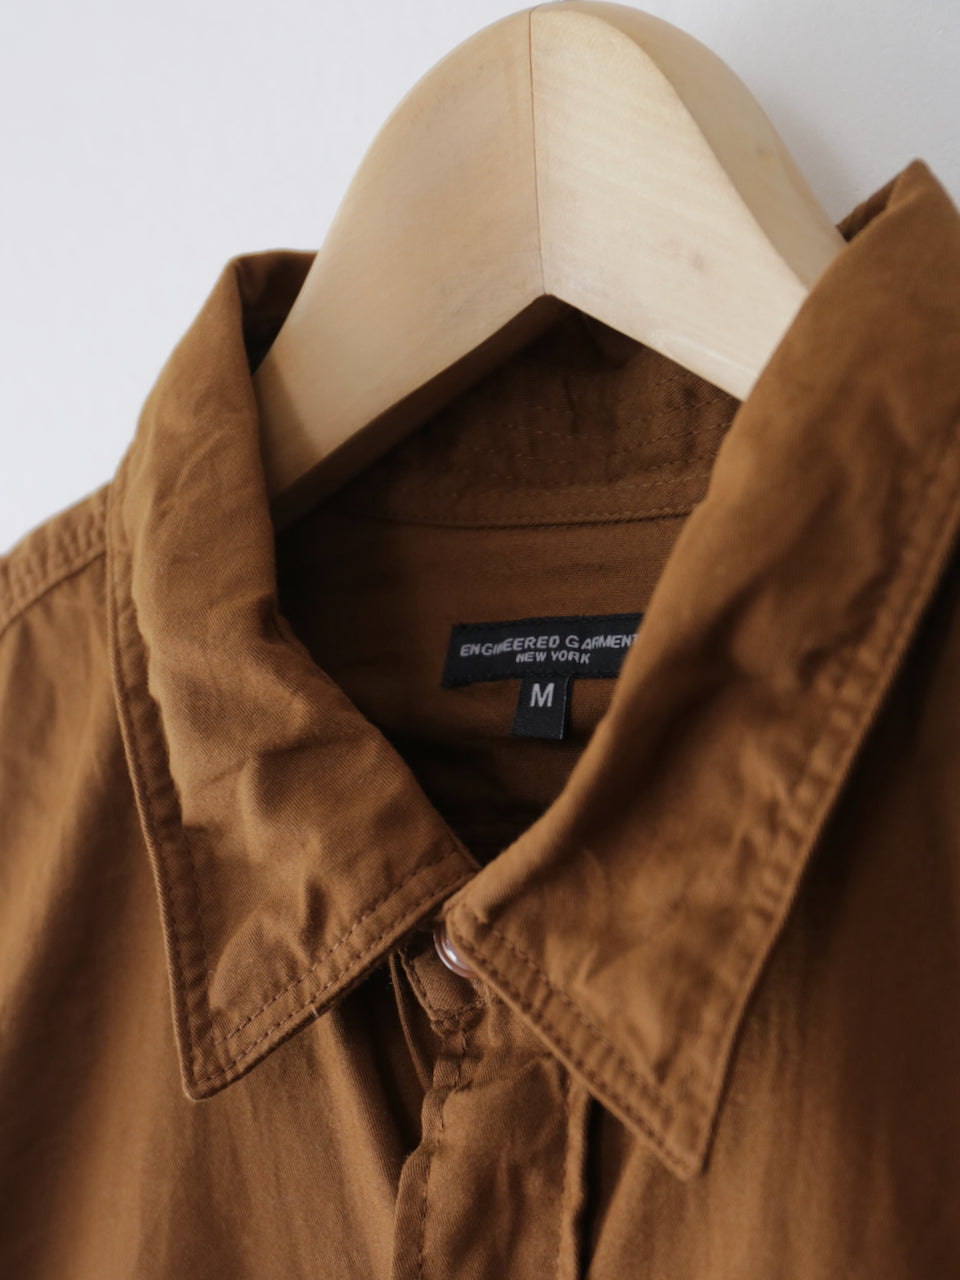 Work Shirt - Cotton Micro Sanded Twill